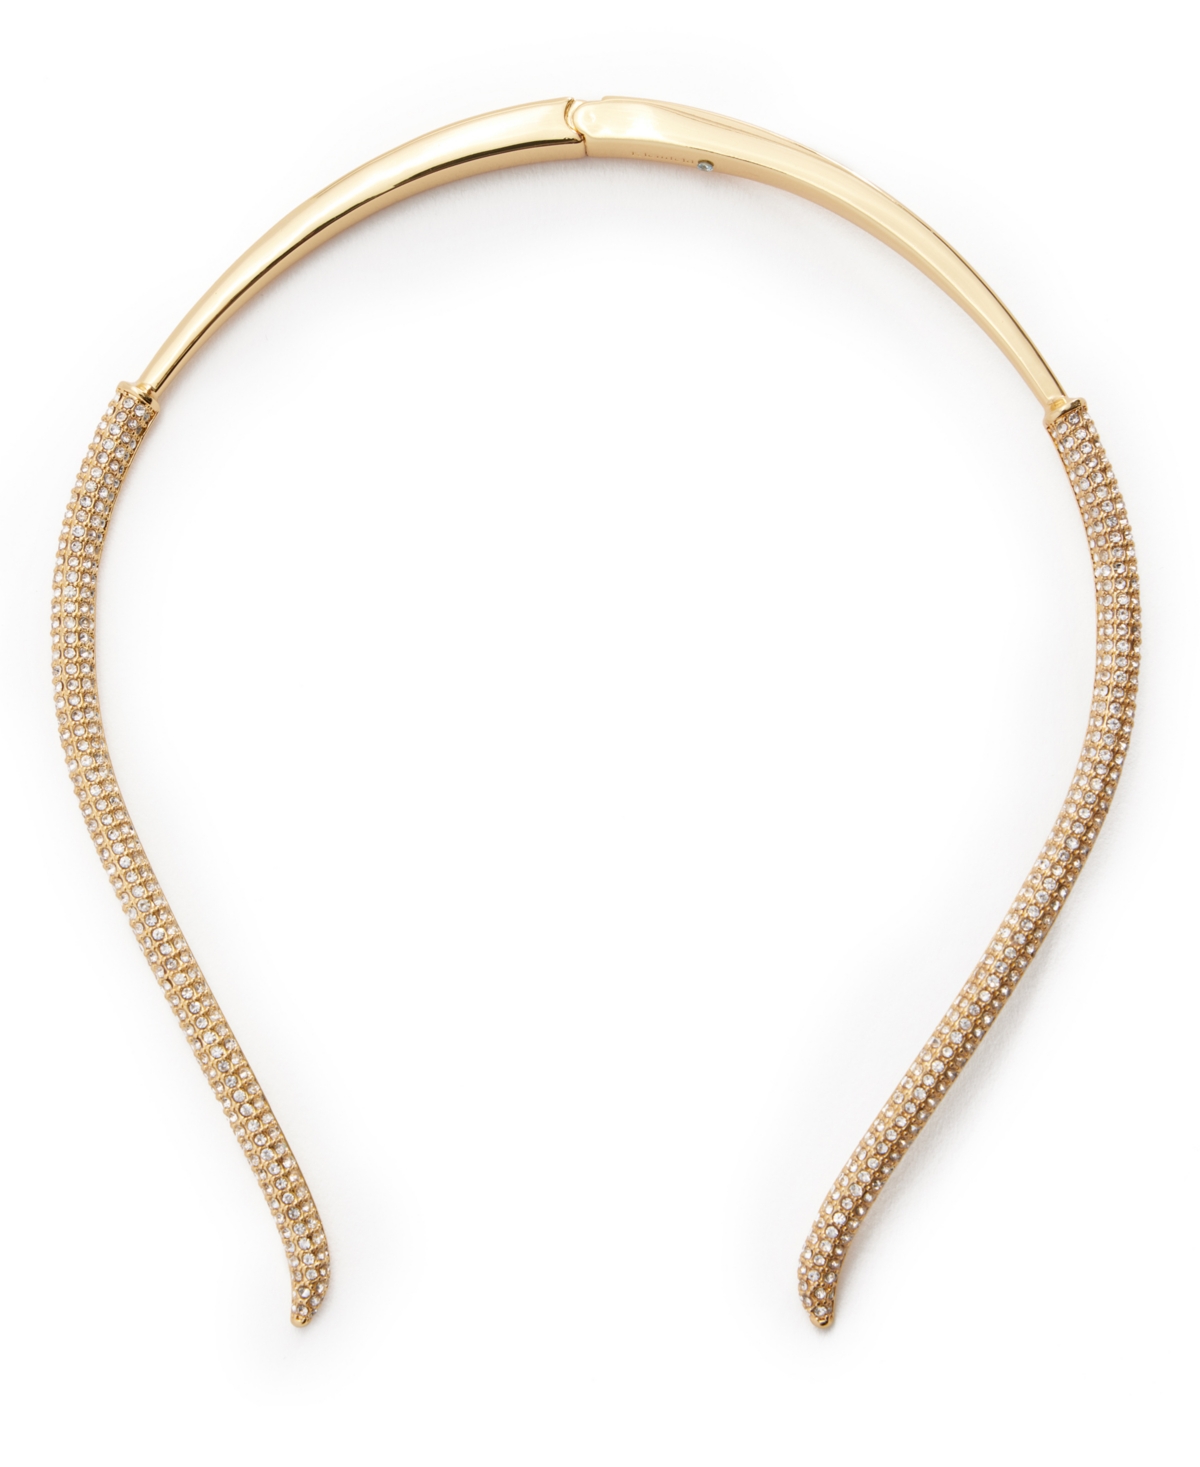 Kleinfeld Faux Stone Pave Hinged Collar Necklace In Crystal,gold